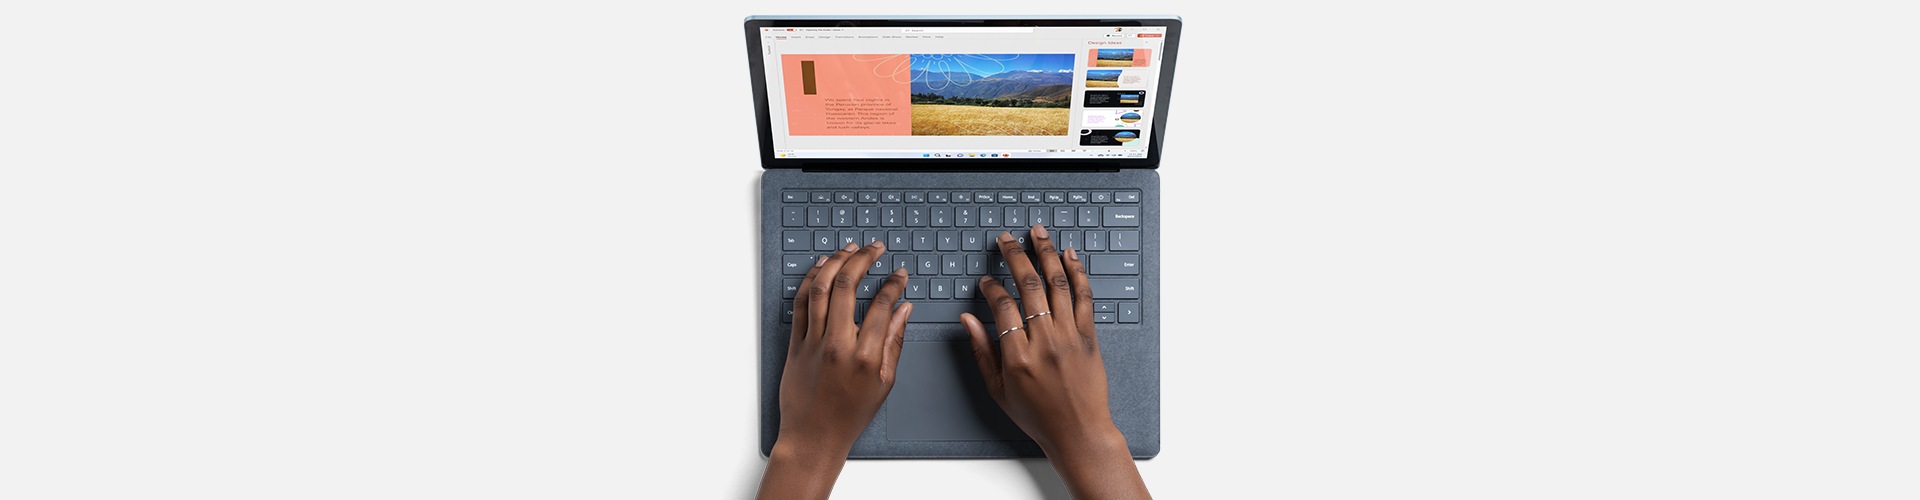 A person’s hands typing on a Surface Type Cover.